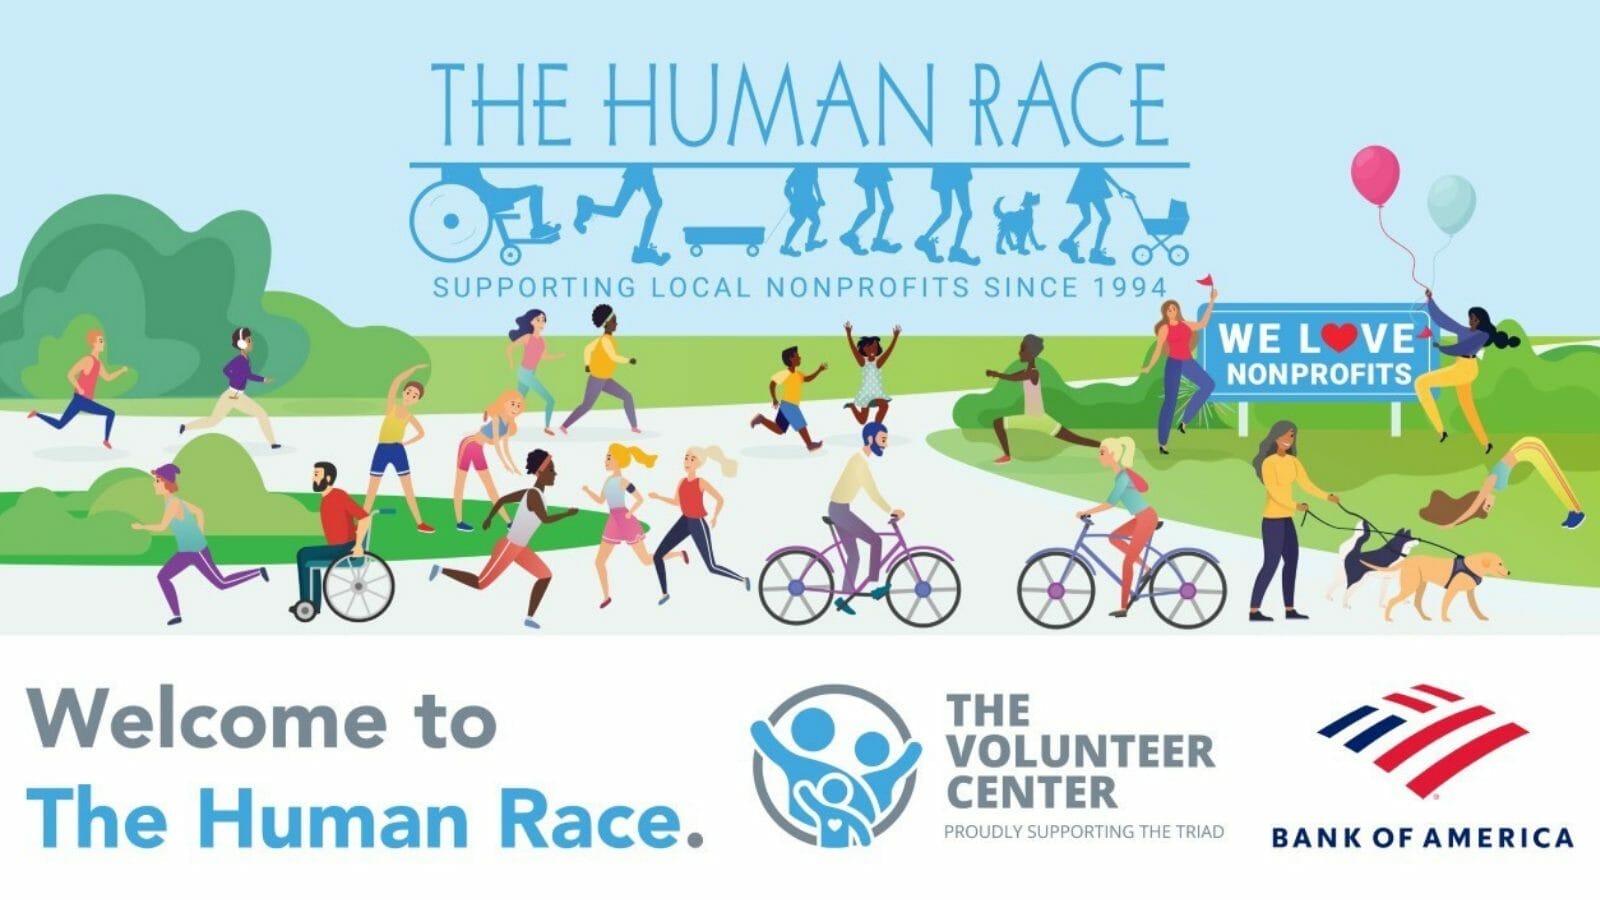 The human race - sponsered by the volunteer center